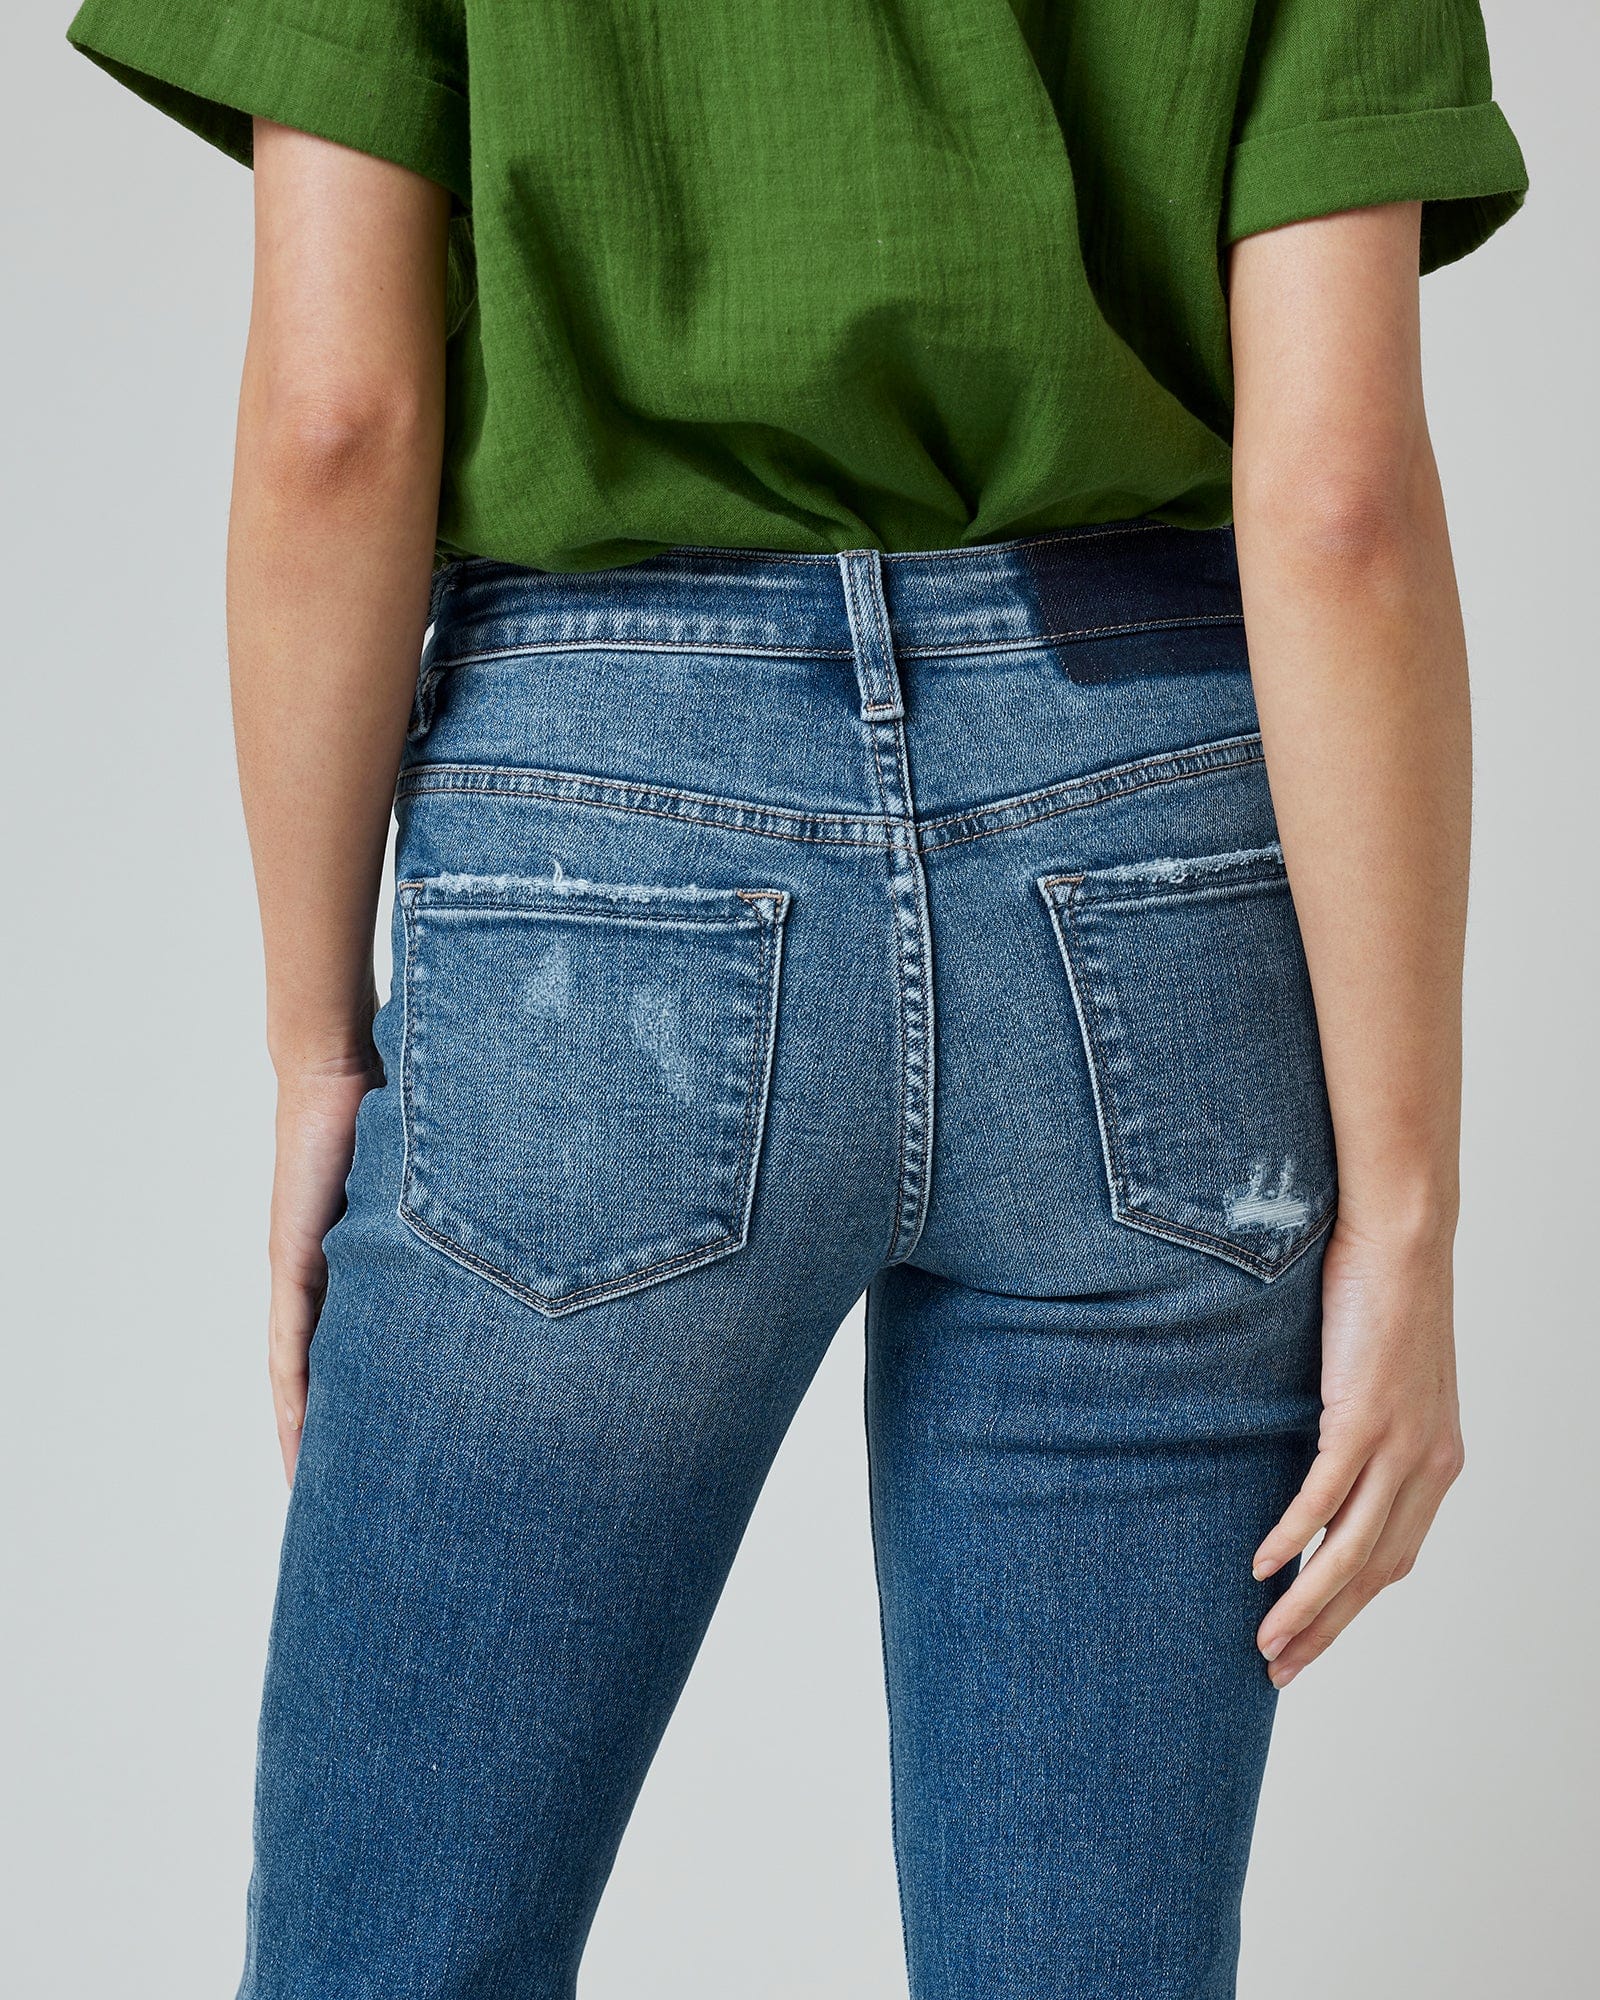 Woman in blue mid-rise cropped denim pants